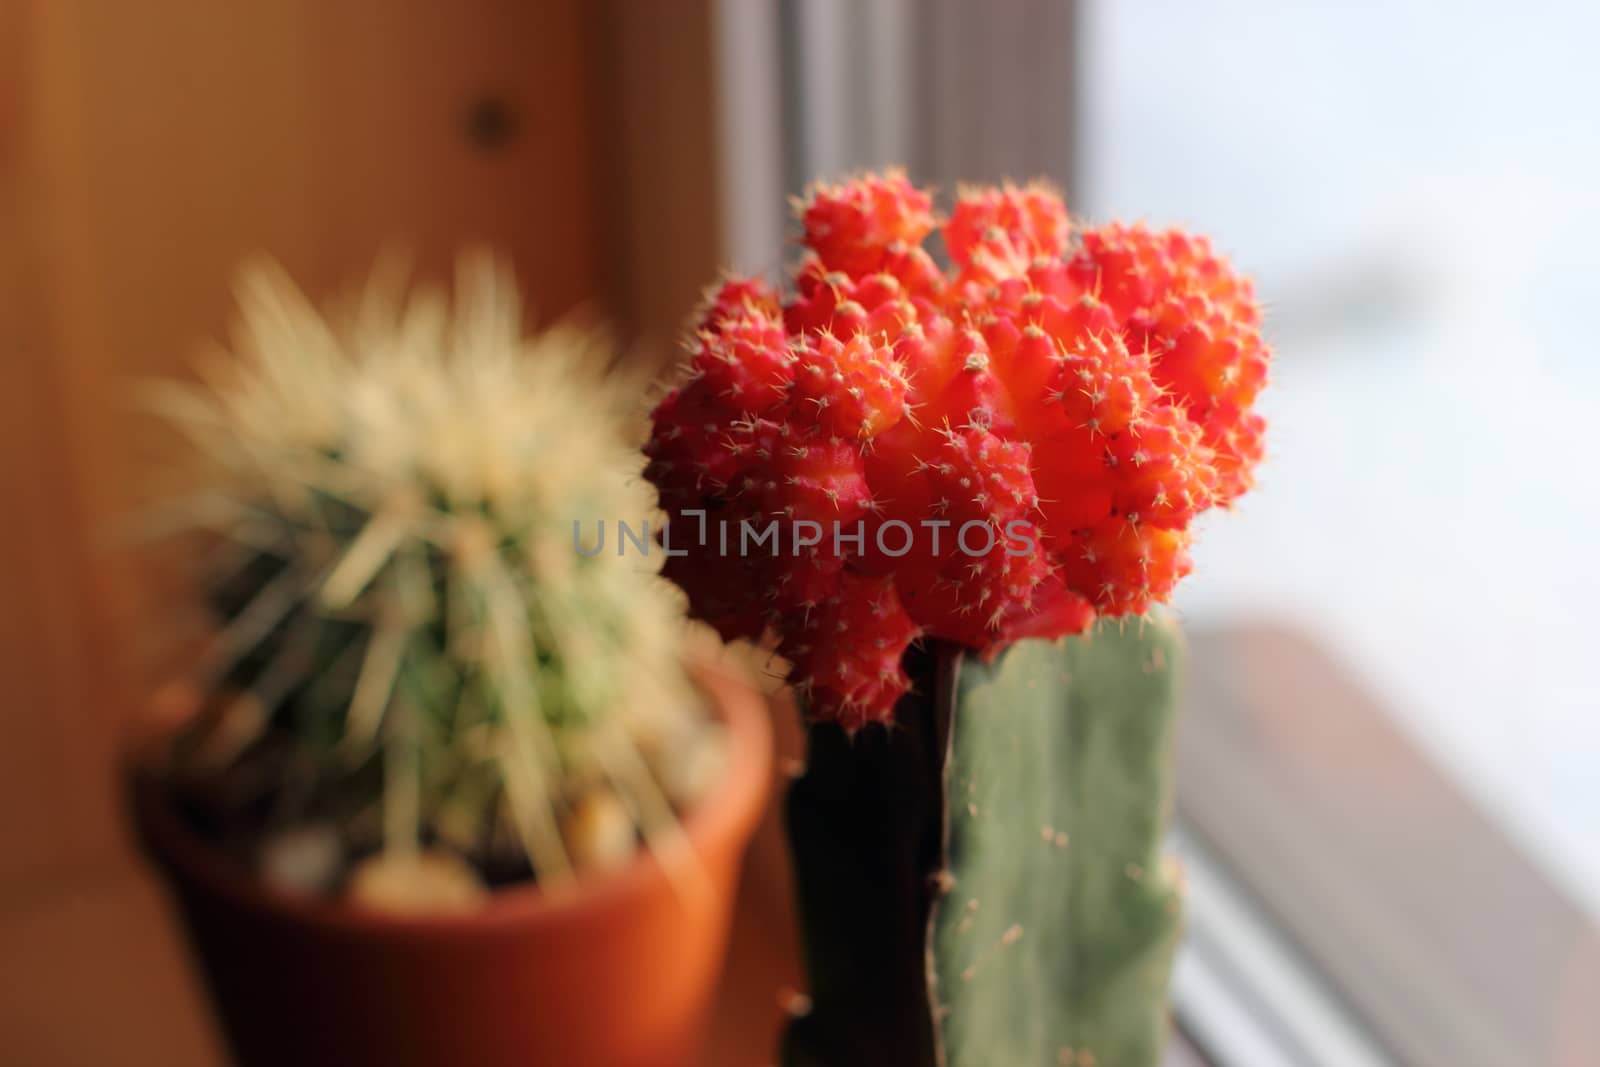 Cactus with red cap by Metanna